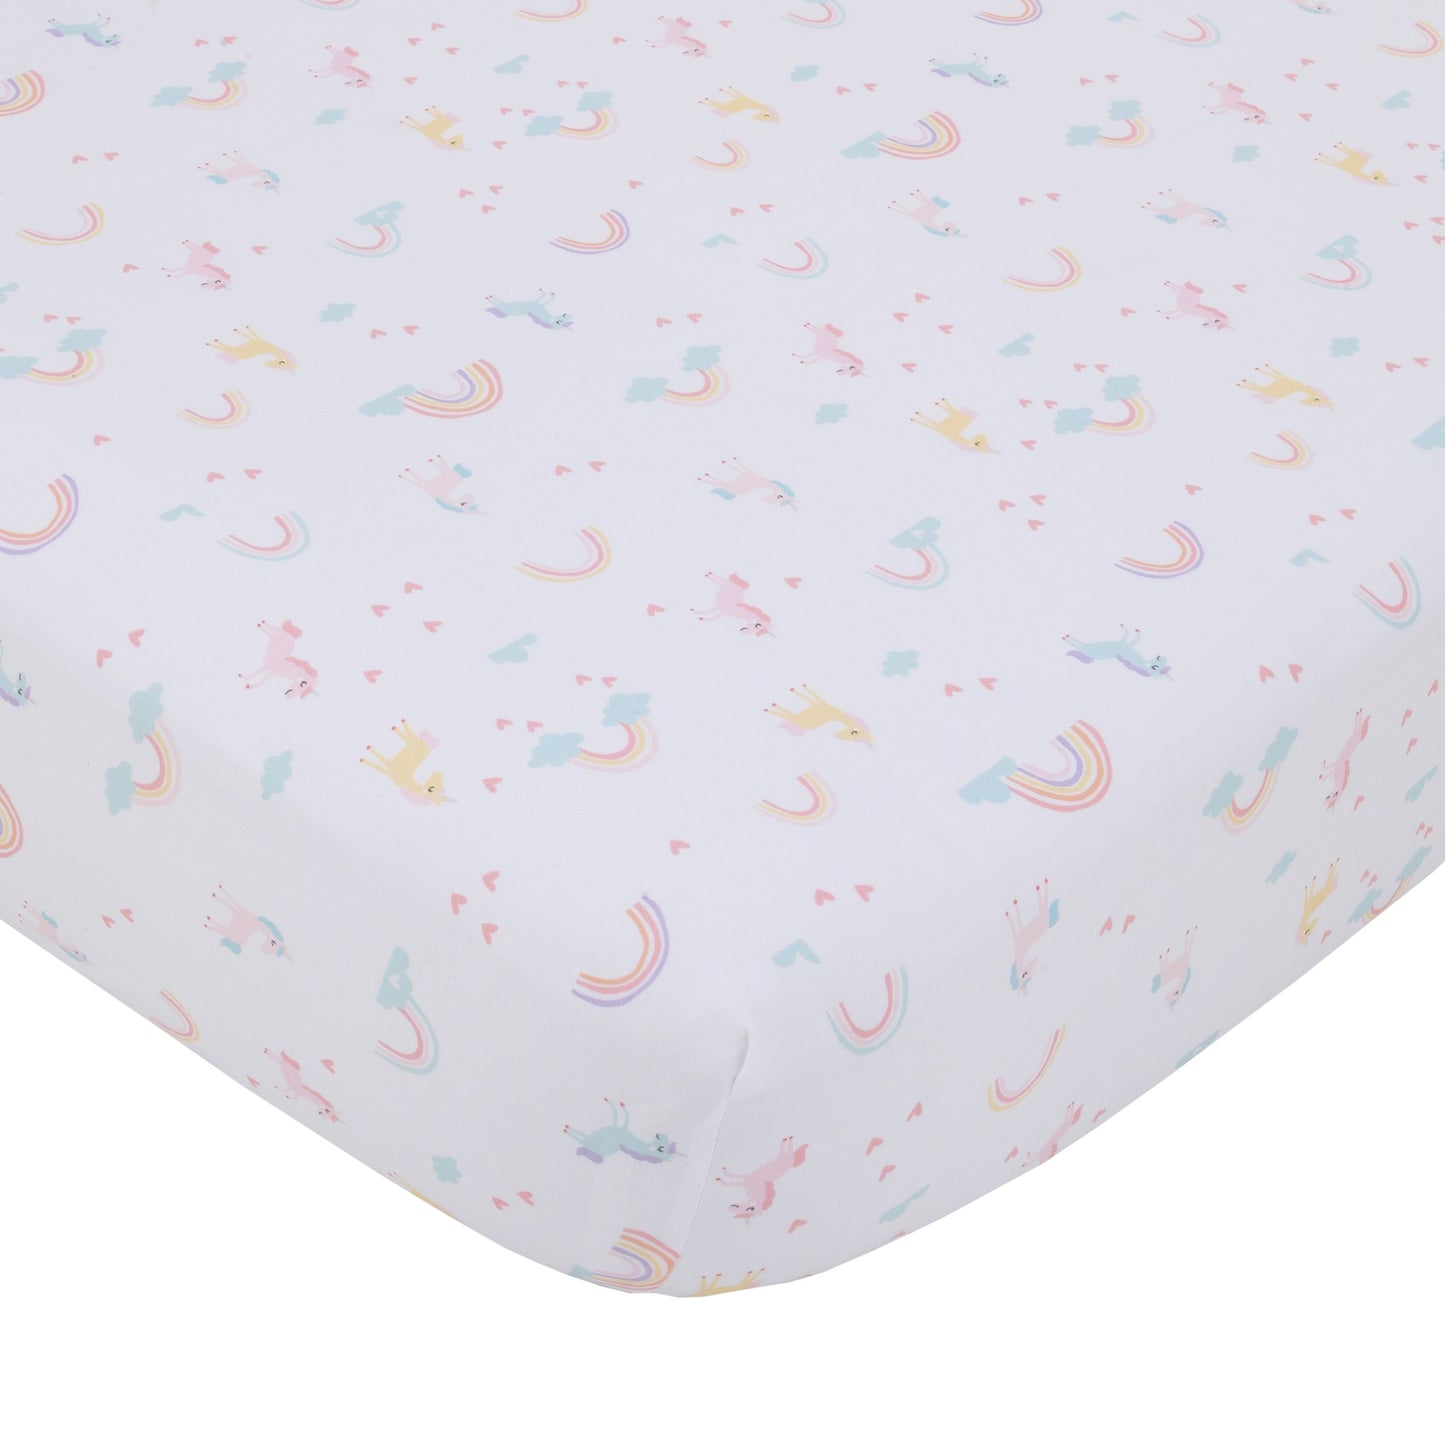 Little Love by NoJo Rainbow Unicorn Pink, Aqua, Yellow and White Fitted Crib Sheet